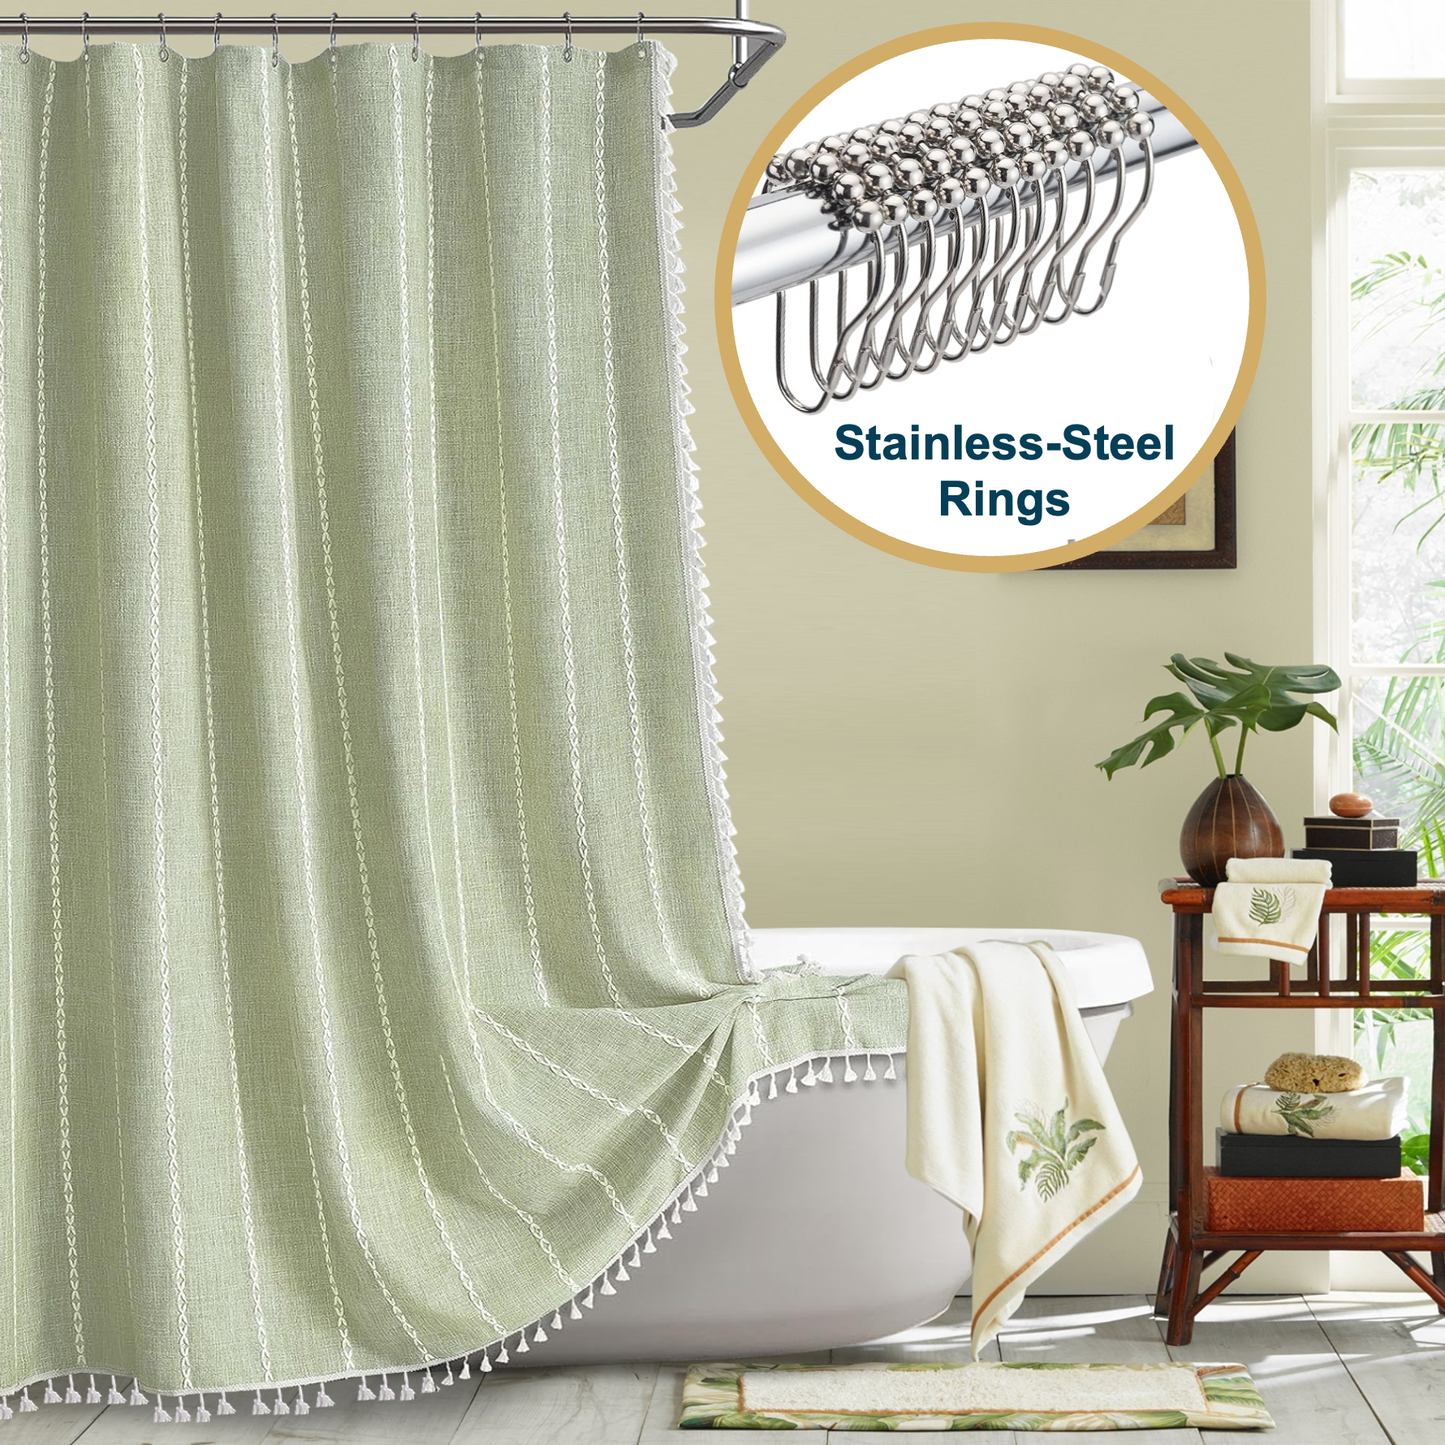 Tassel Shower Curtain and Stainless-Steel Hooks Set, 330 GSM, 72 x 72 in